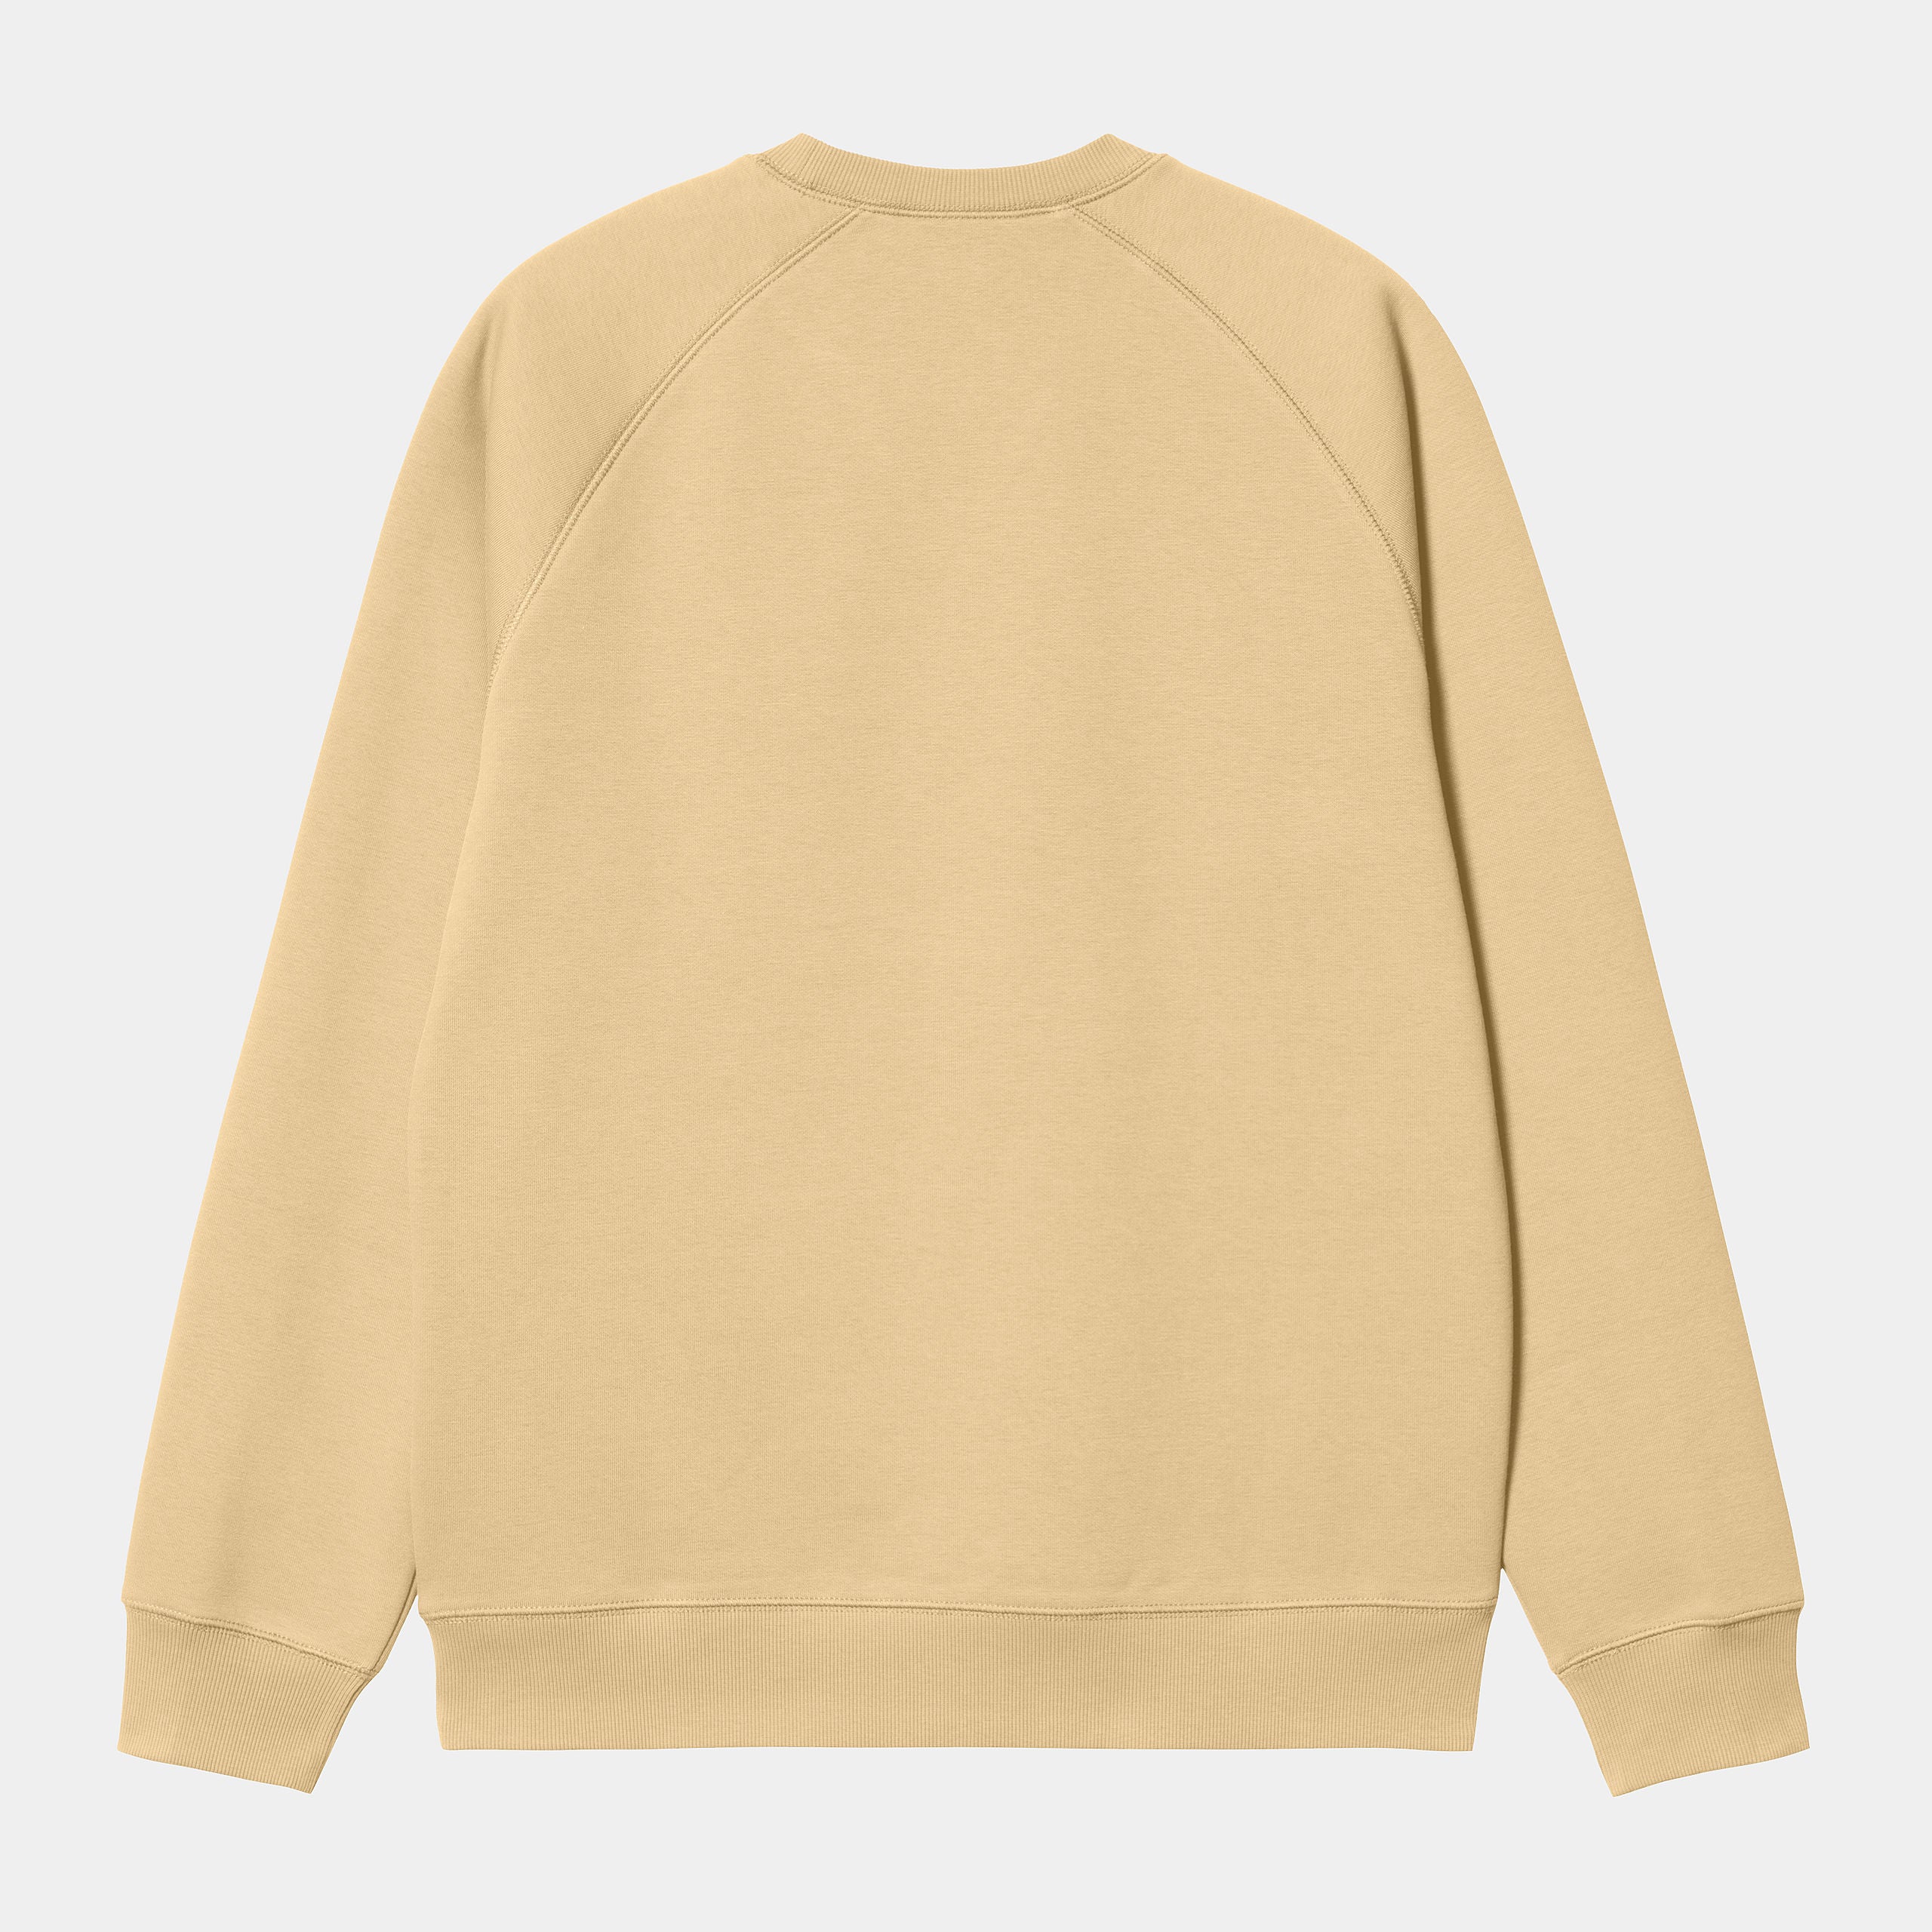 Carhartt WIP Mens Chase Sweat Top - Citron